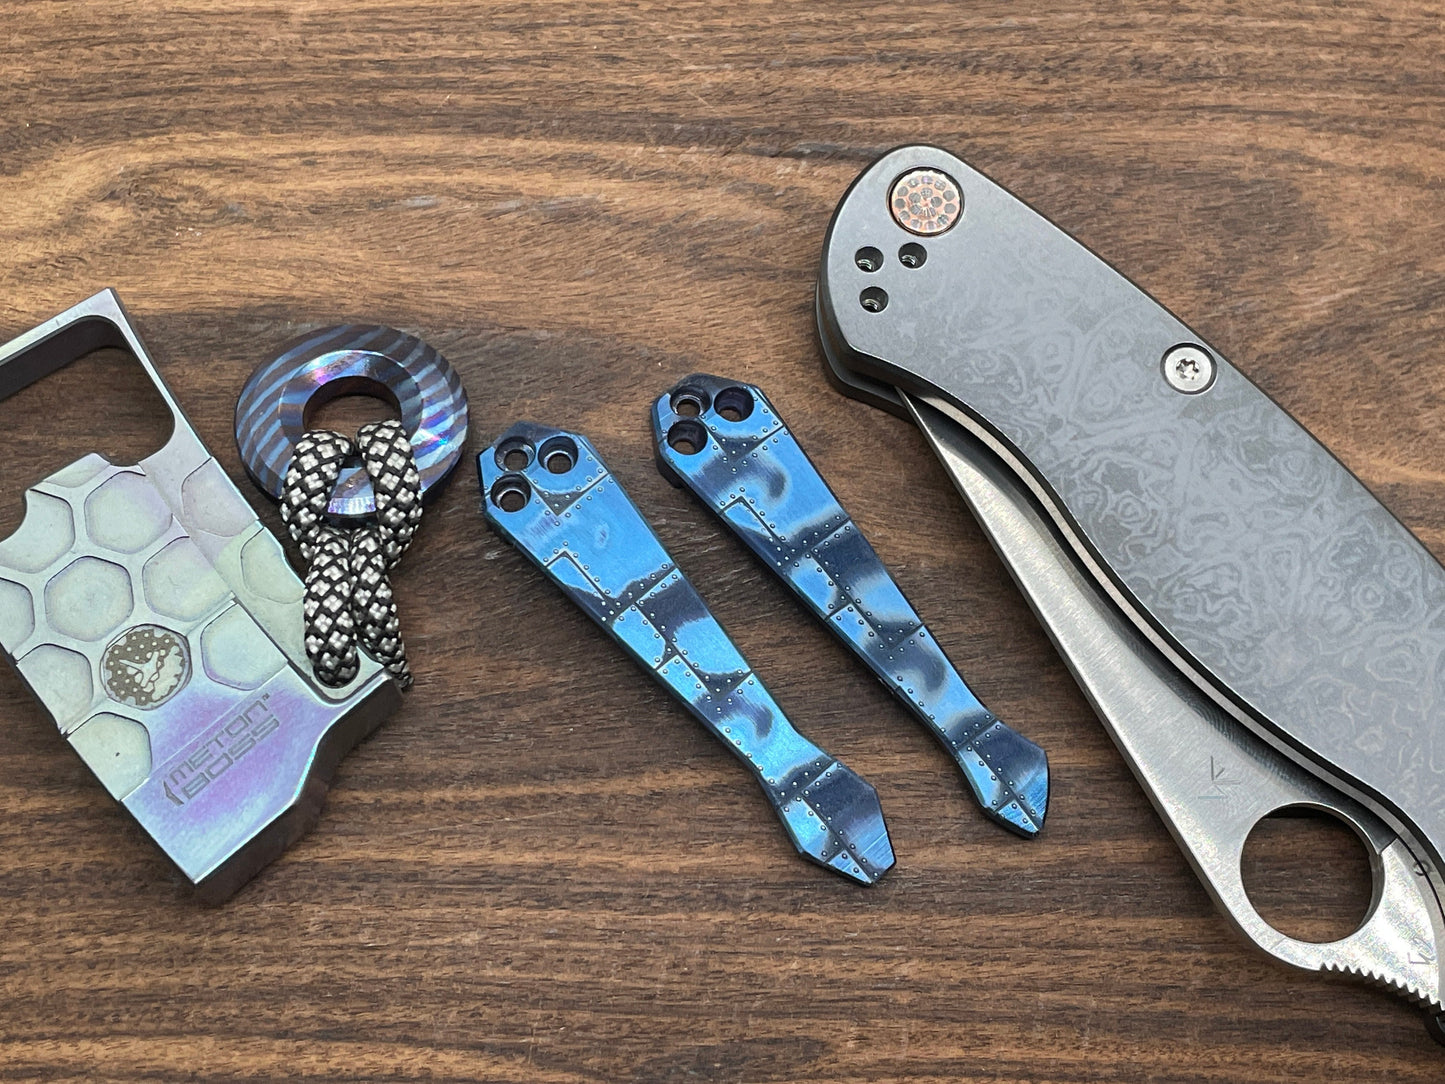 RIVETED AIRPLANE Blue ano Dmd Titanium Clip for most Spyderco models